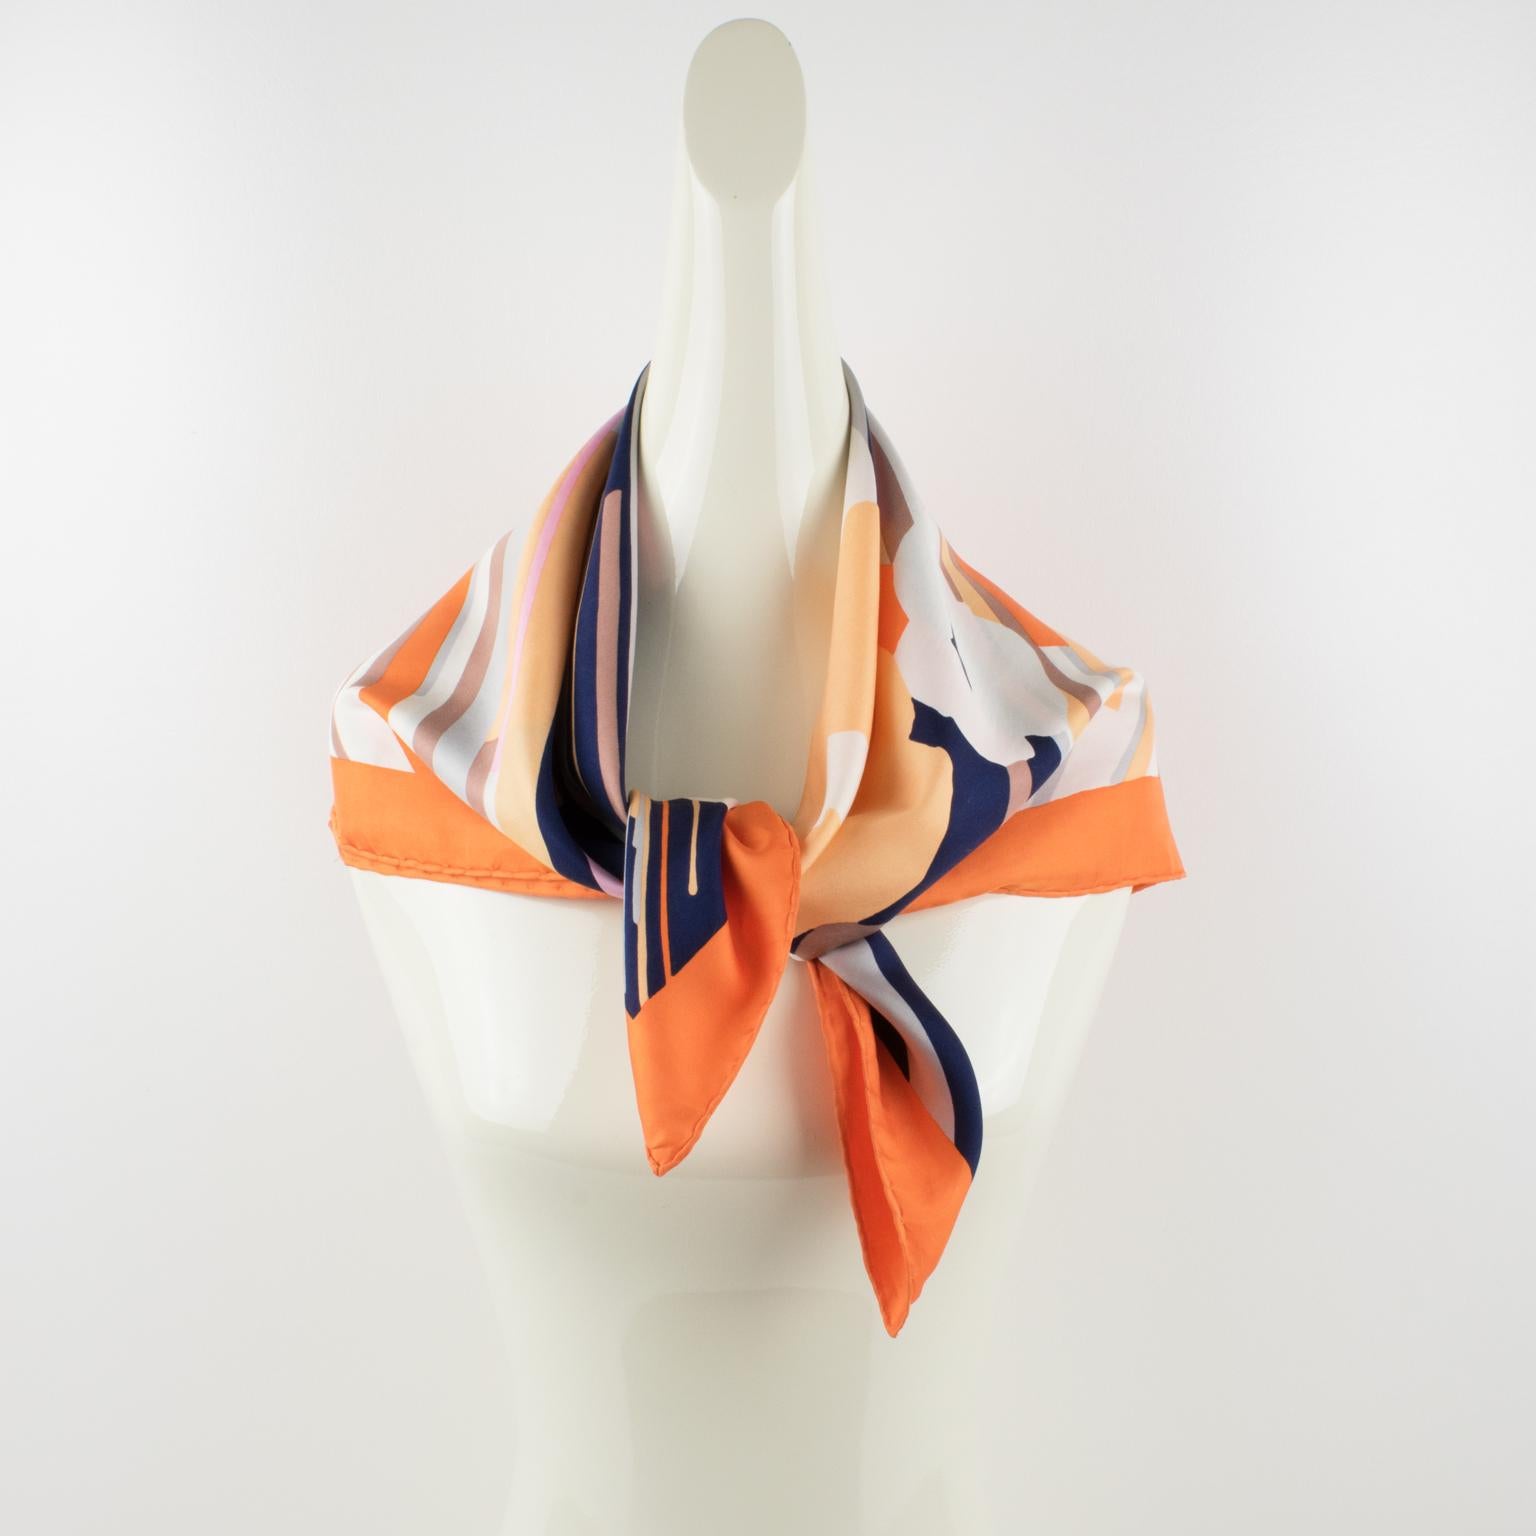 This elegant silk scarf by Christian Dior Paris boasts a geometric and floral print pattern. The combination of colors is bright and vibrant with navy blue, purple, pink, gray, white, salmon-orange, and a bright orange border. The piece is signed